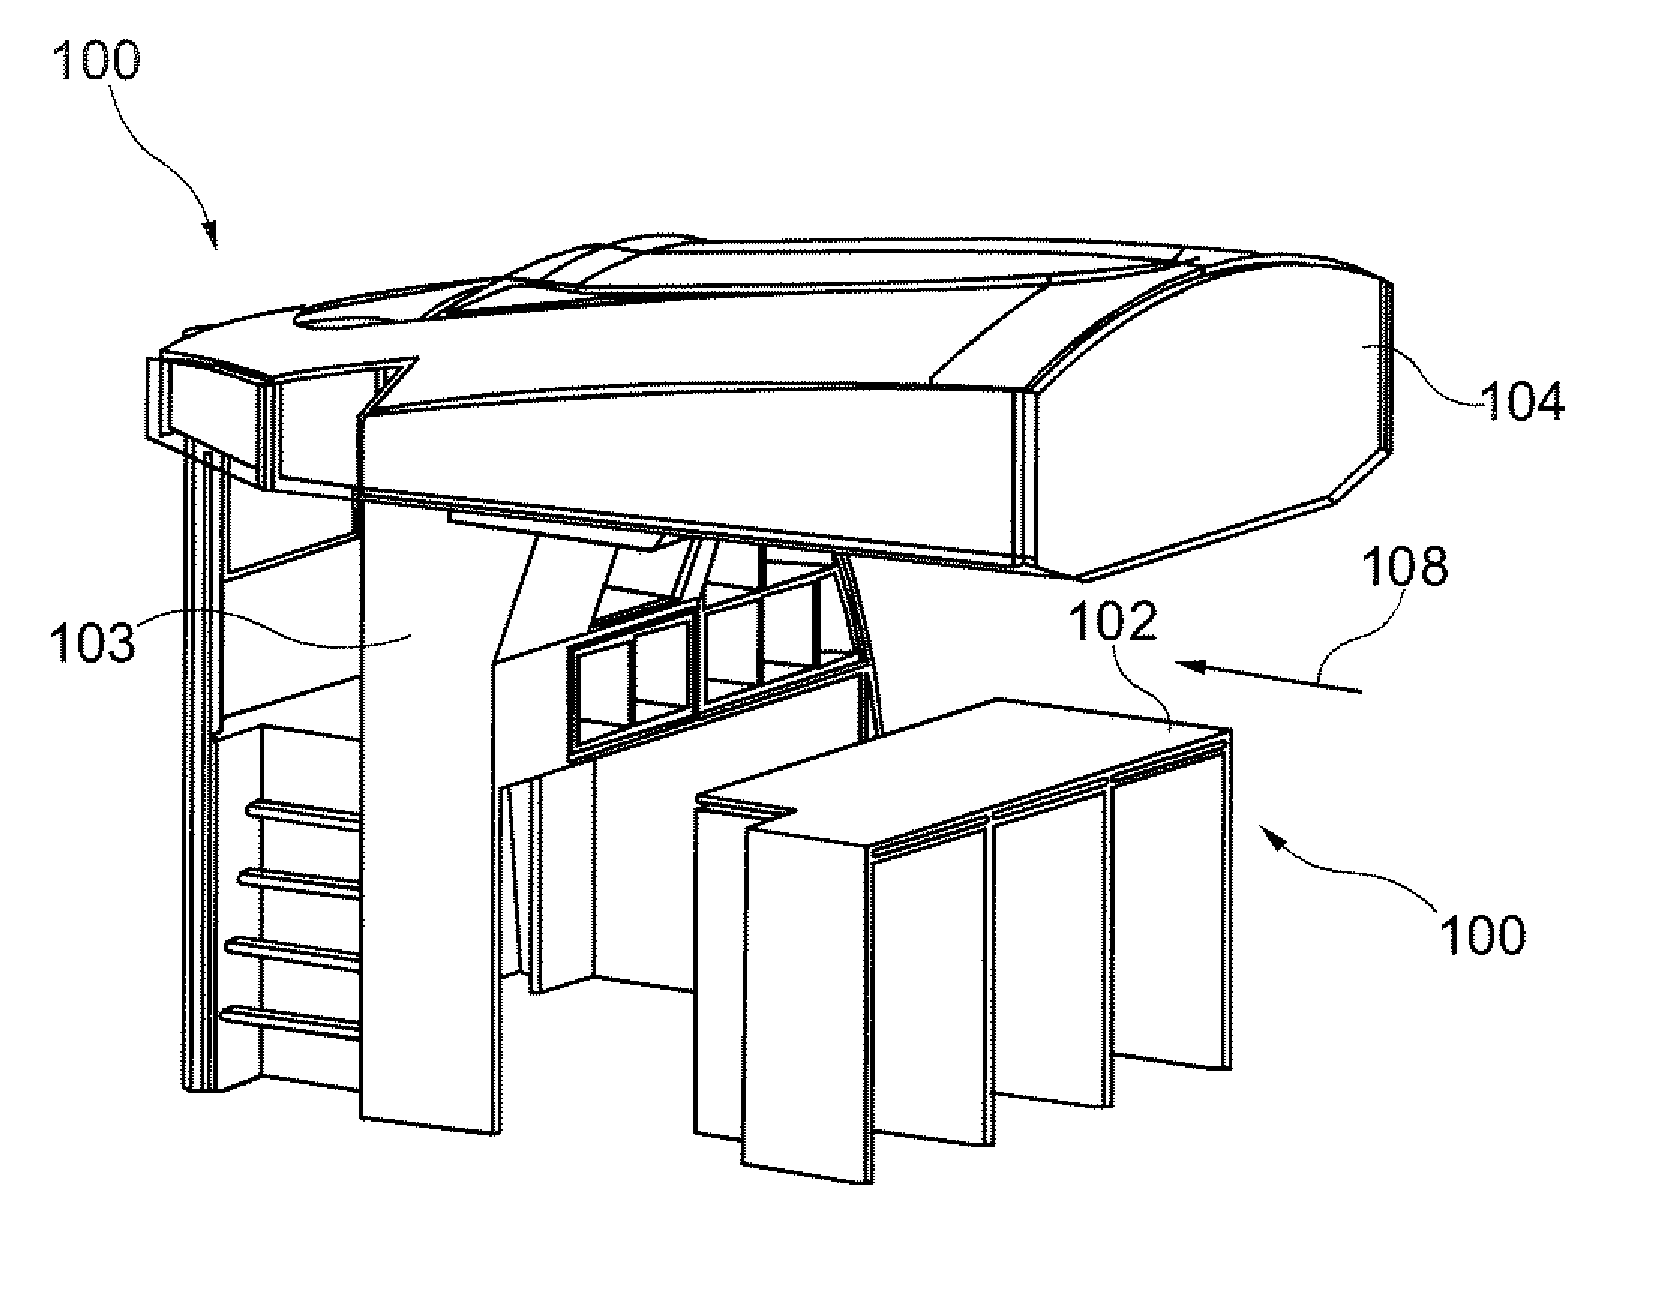 Integrated acoustic decoupling in a habitation module